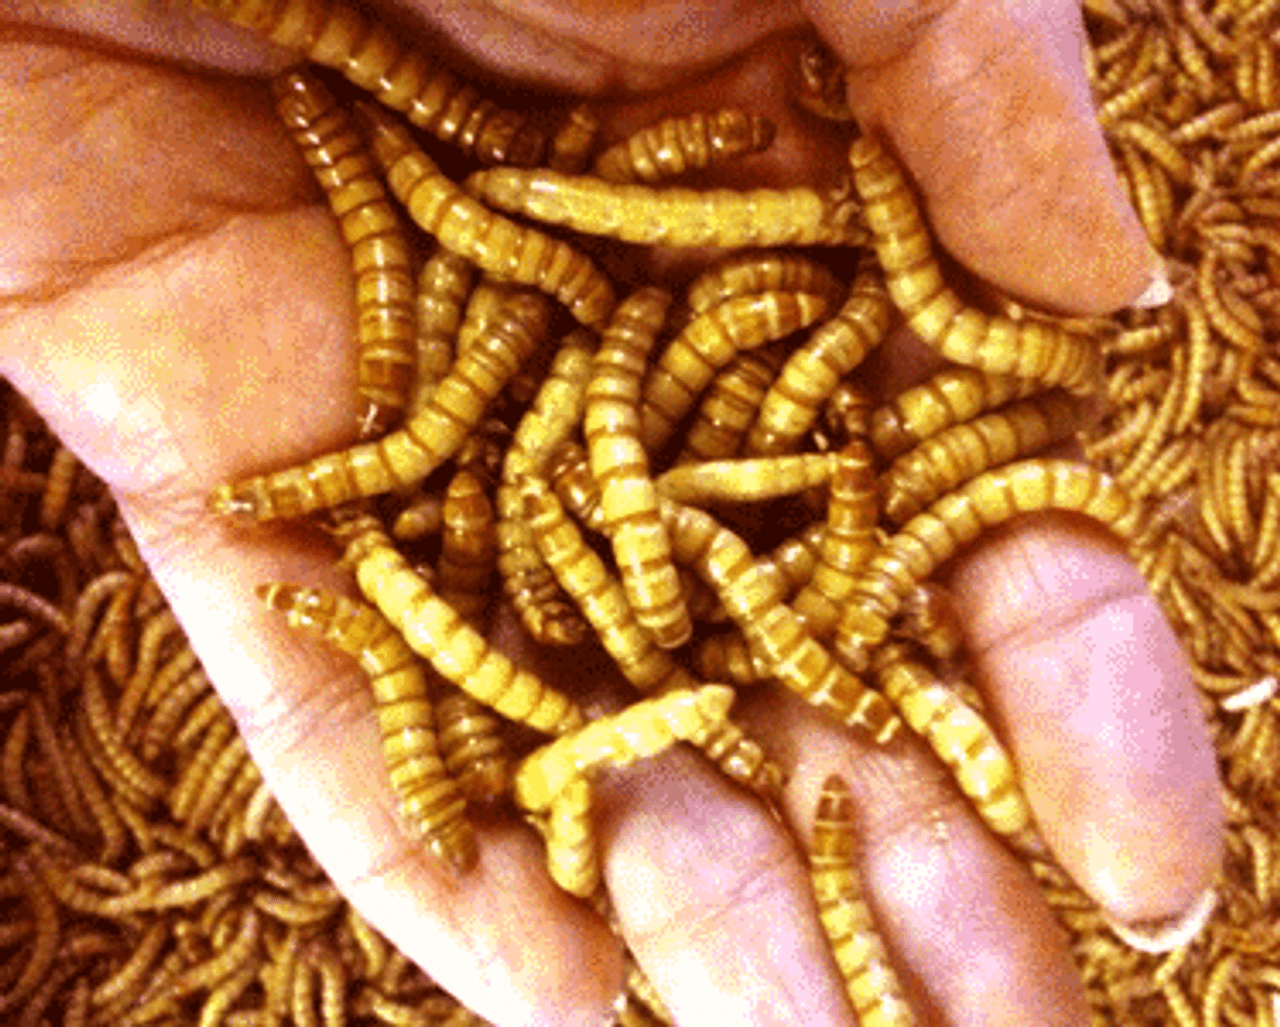 250 Giant Mealworms